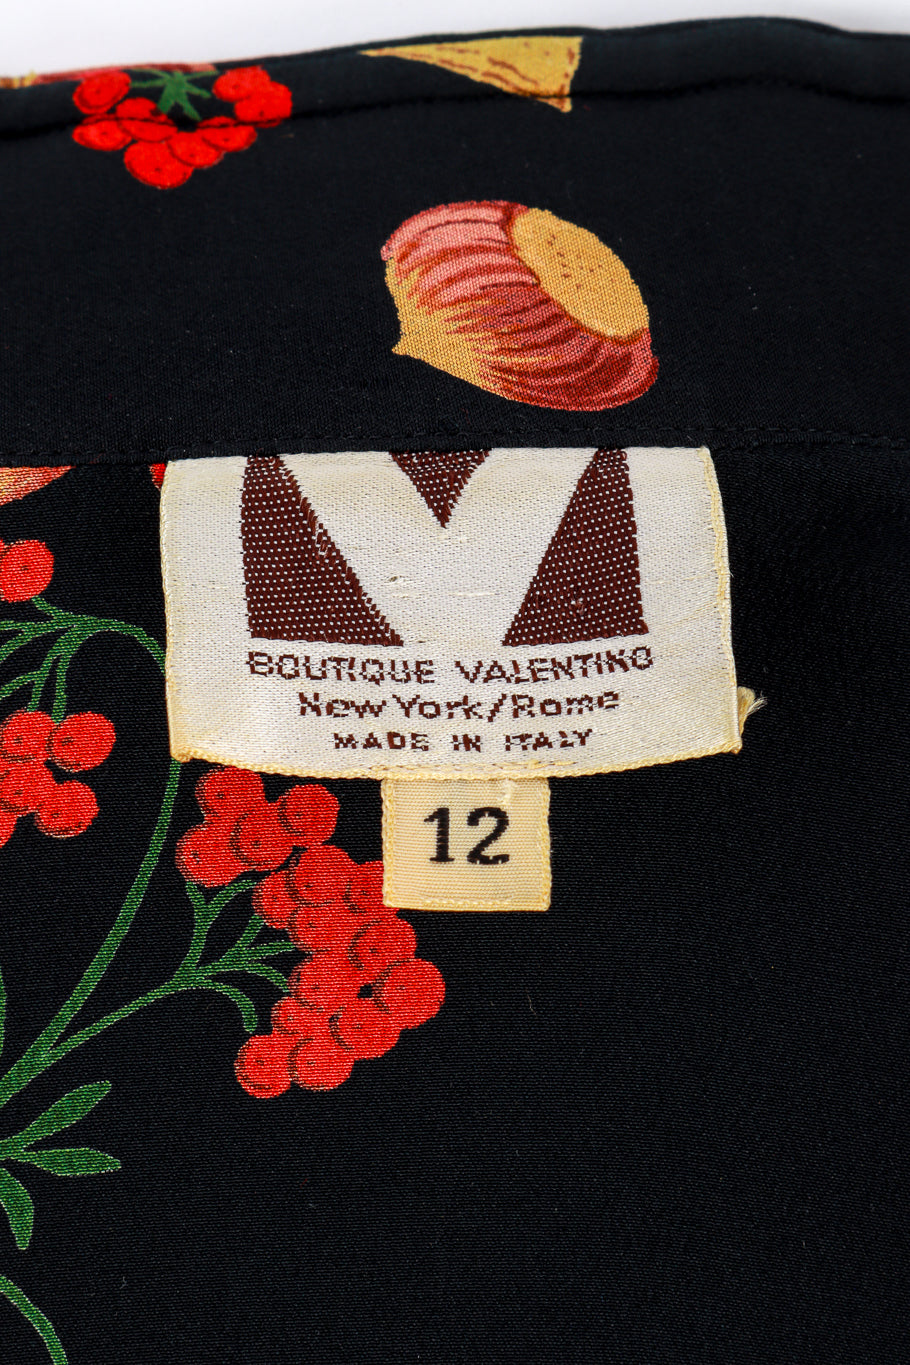 Vintage Valentino Chestnut Silk Shirt with Scarf & Velvet Skirt Twin Set flat lay close up of the shirt makers label reading 